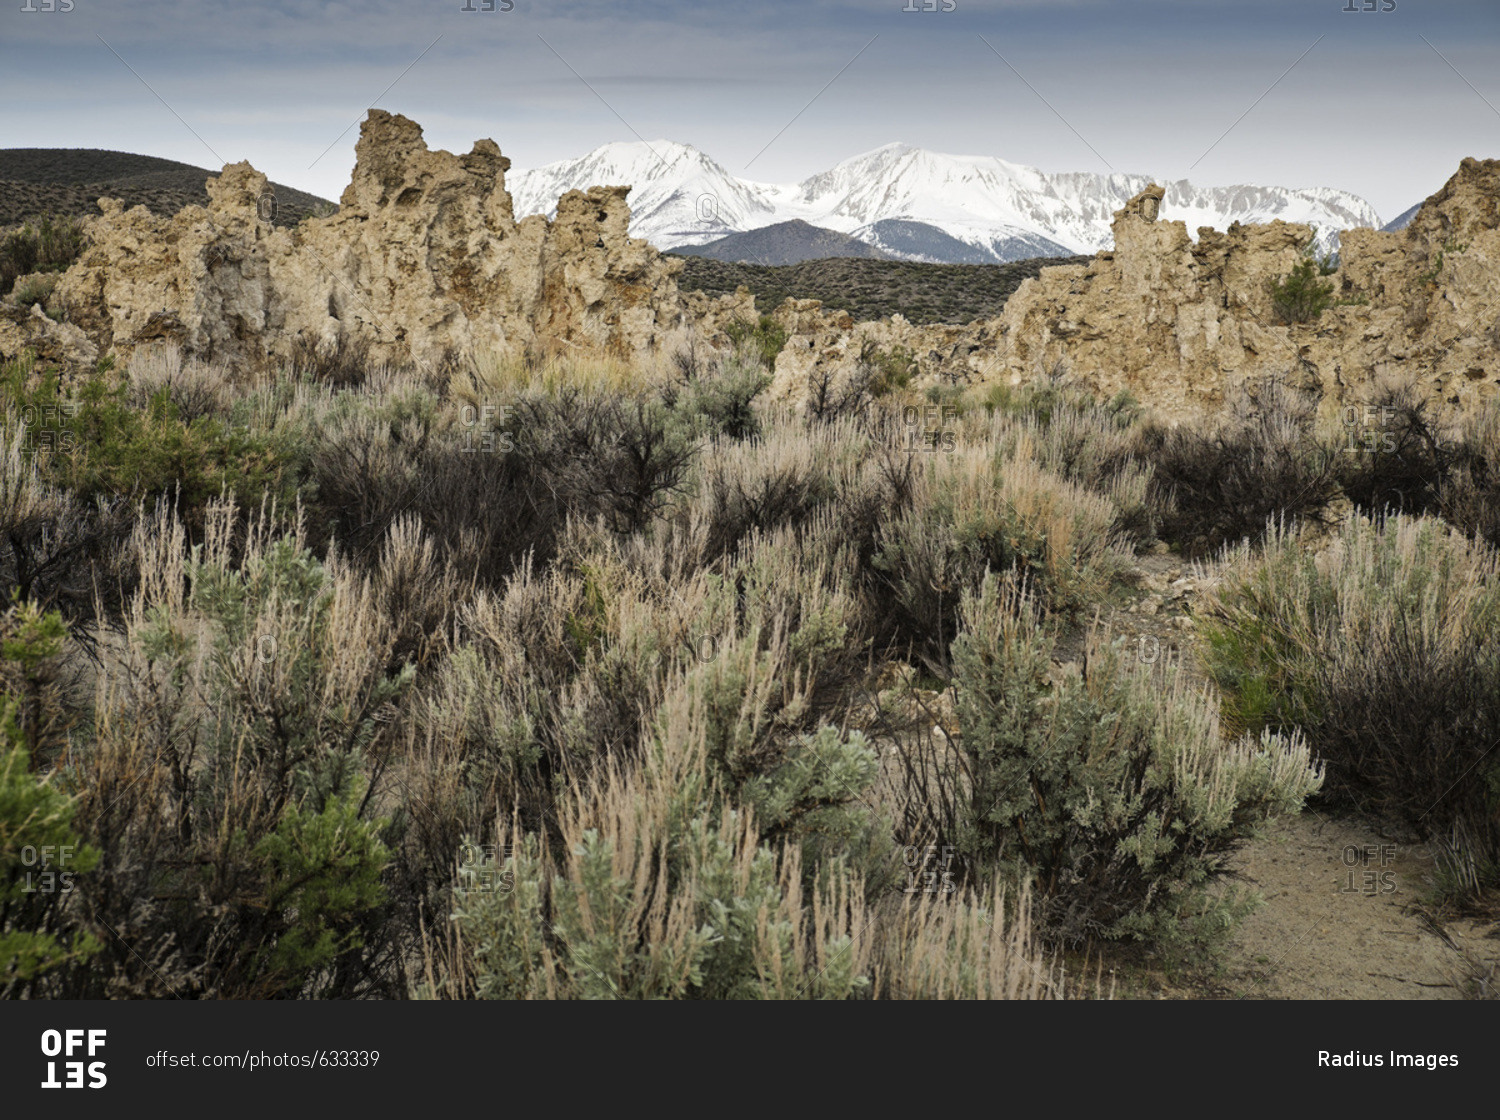 Rock formations and vegetation of Mono Lake with Sierra Nevada Mountains in the background in Eastern California, USA